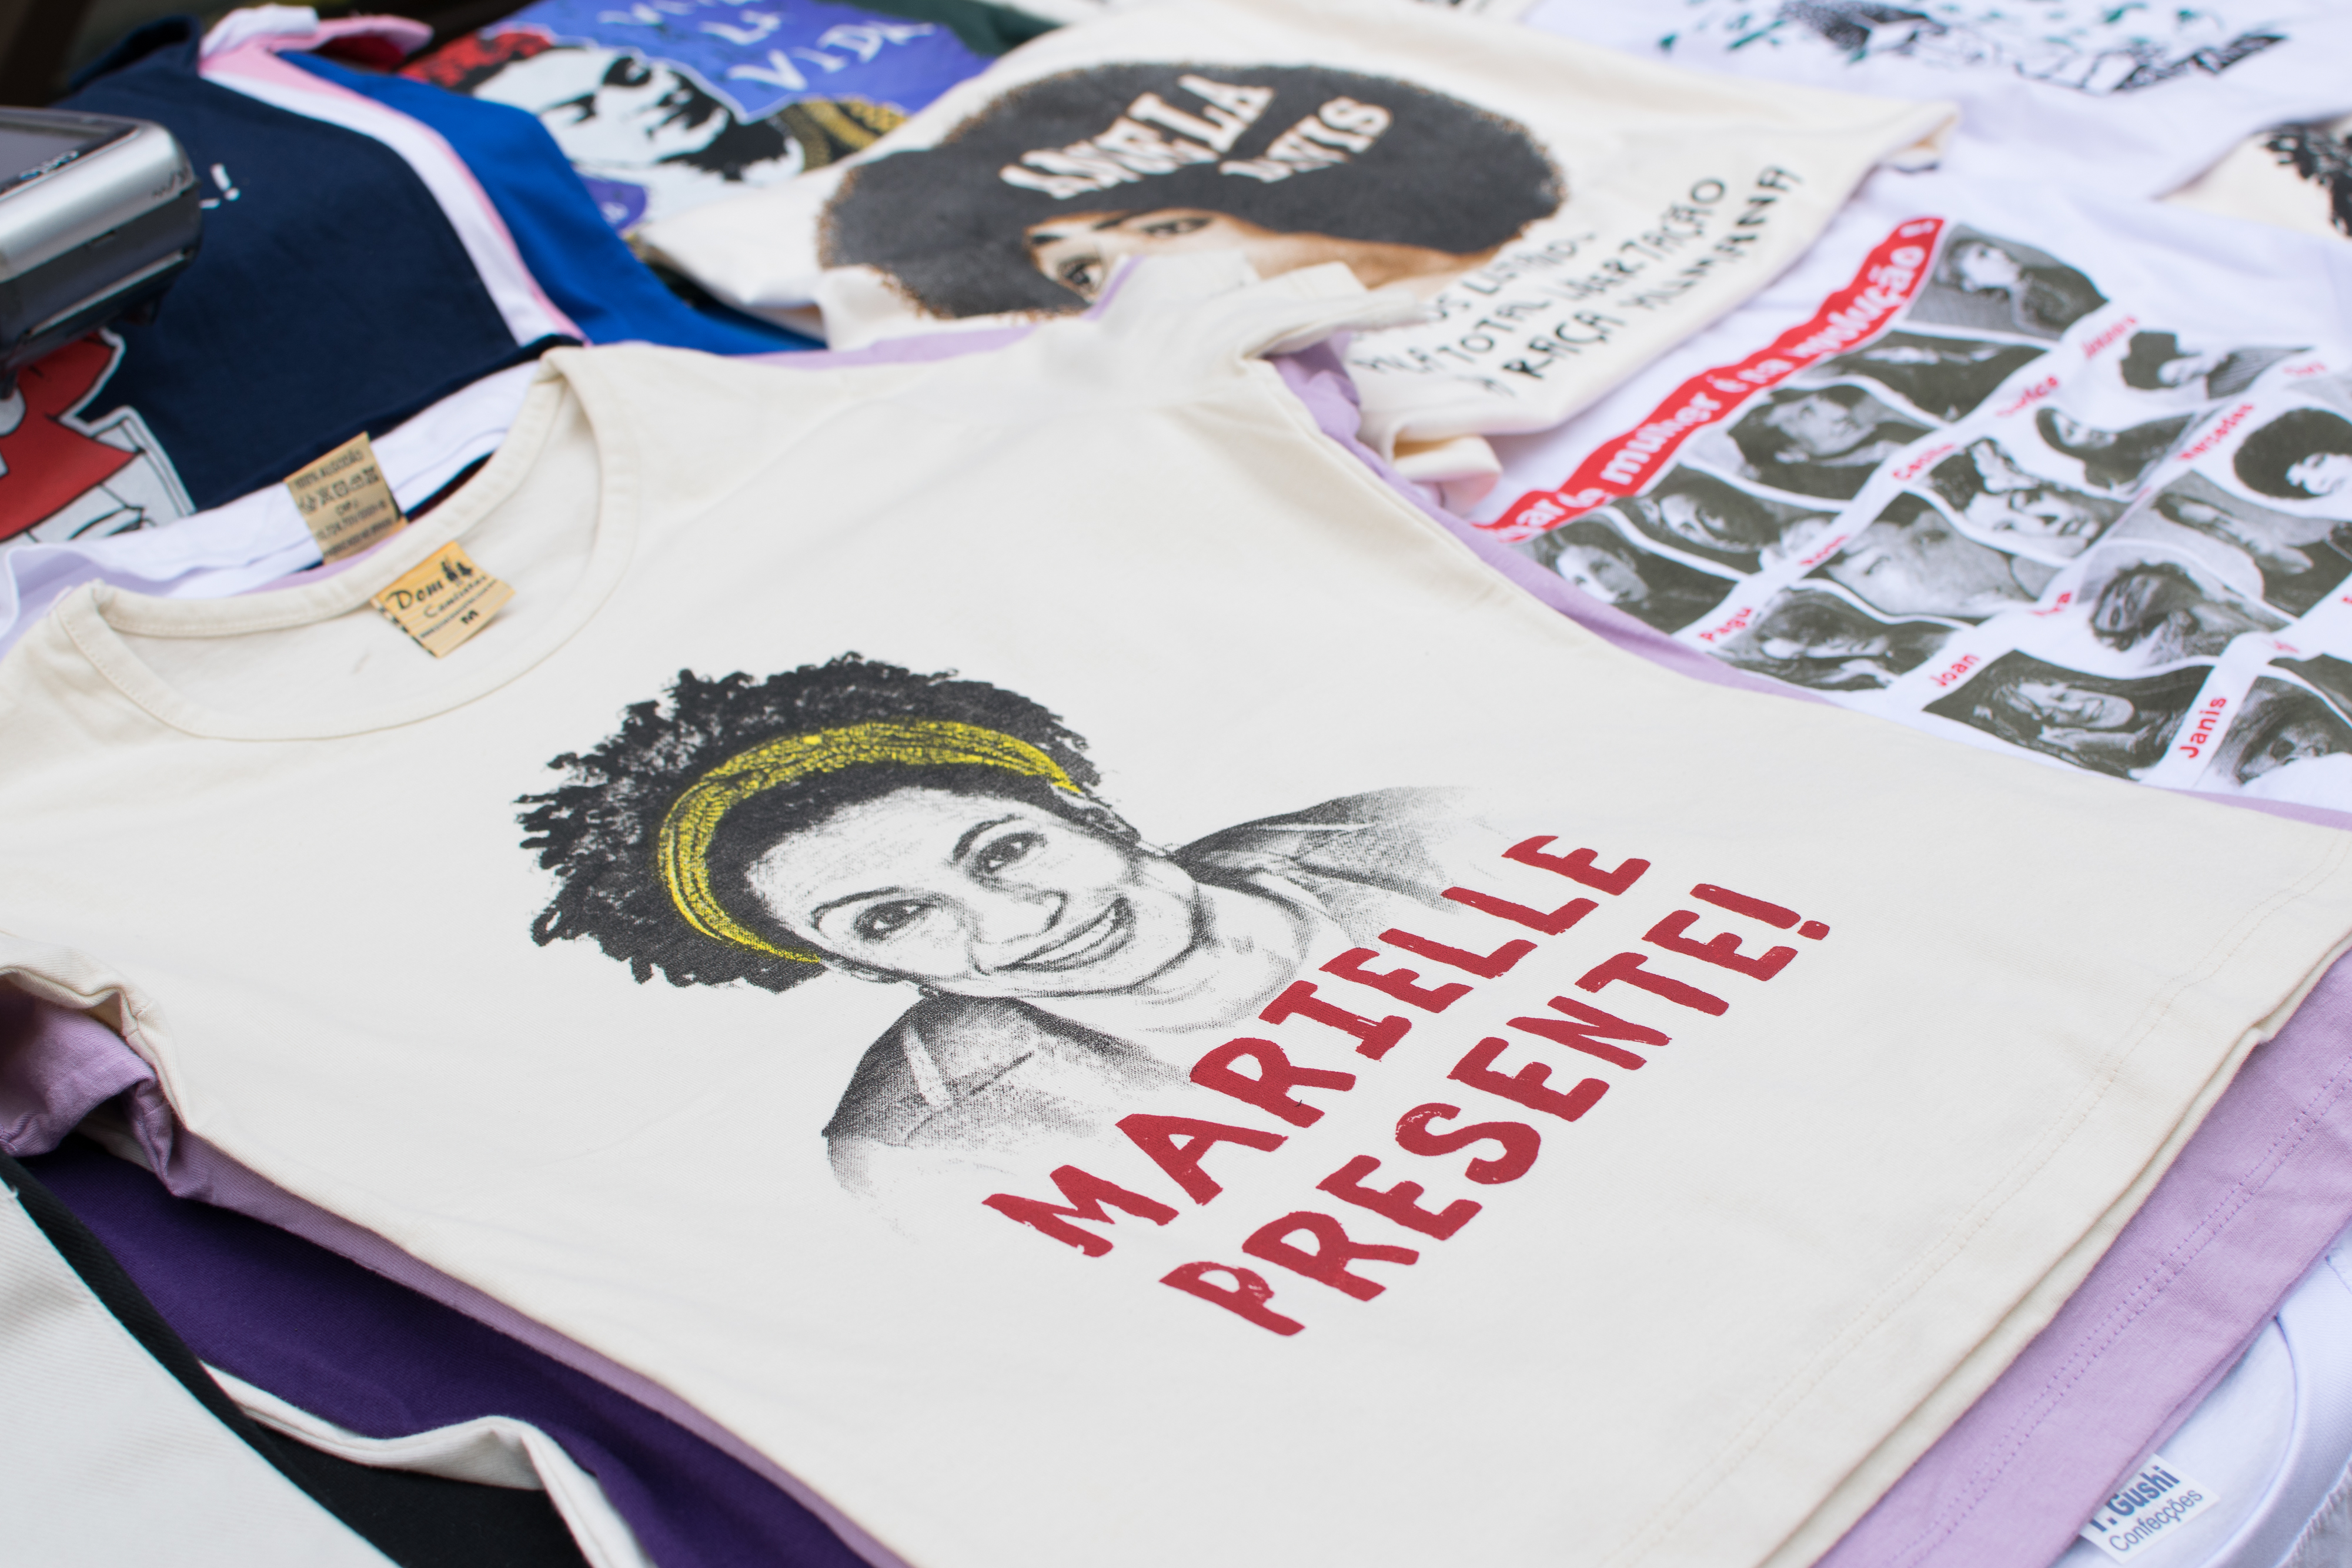 “How many more need to die for this war to be over?”: Marielle Franco’s murder over a month on